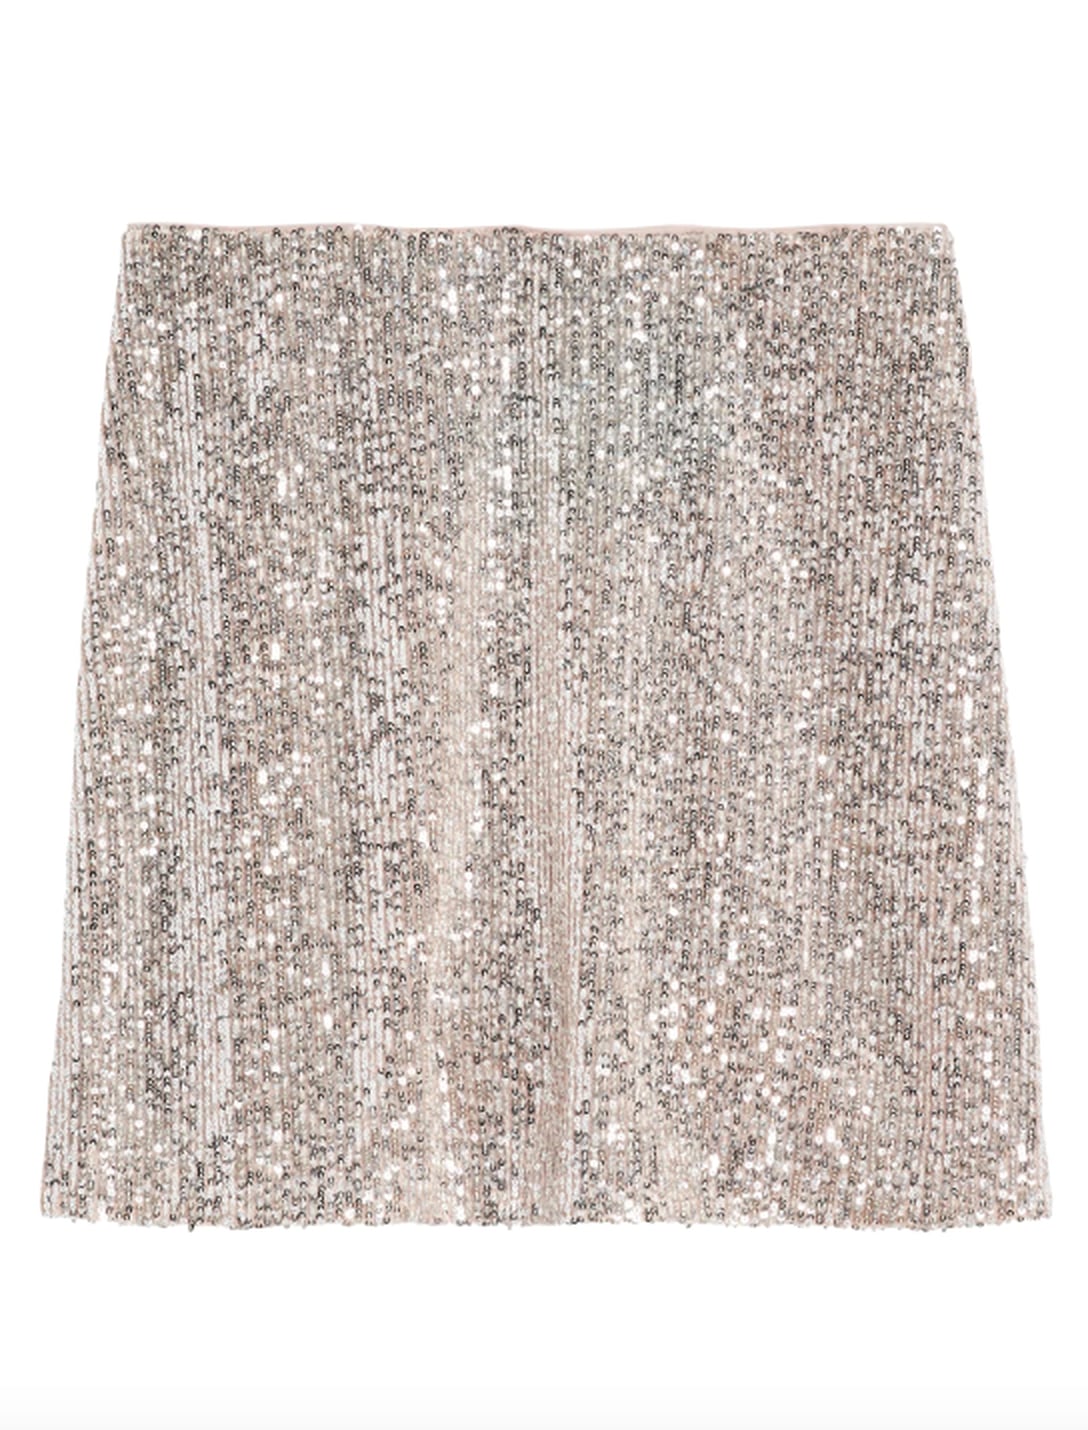 Best Sequined Clothing From Banana Republic For the Holidays | POPSUGAR ...